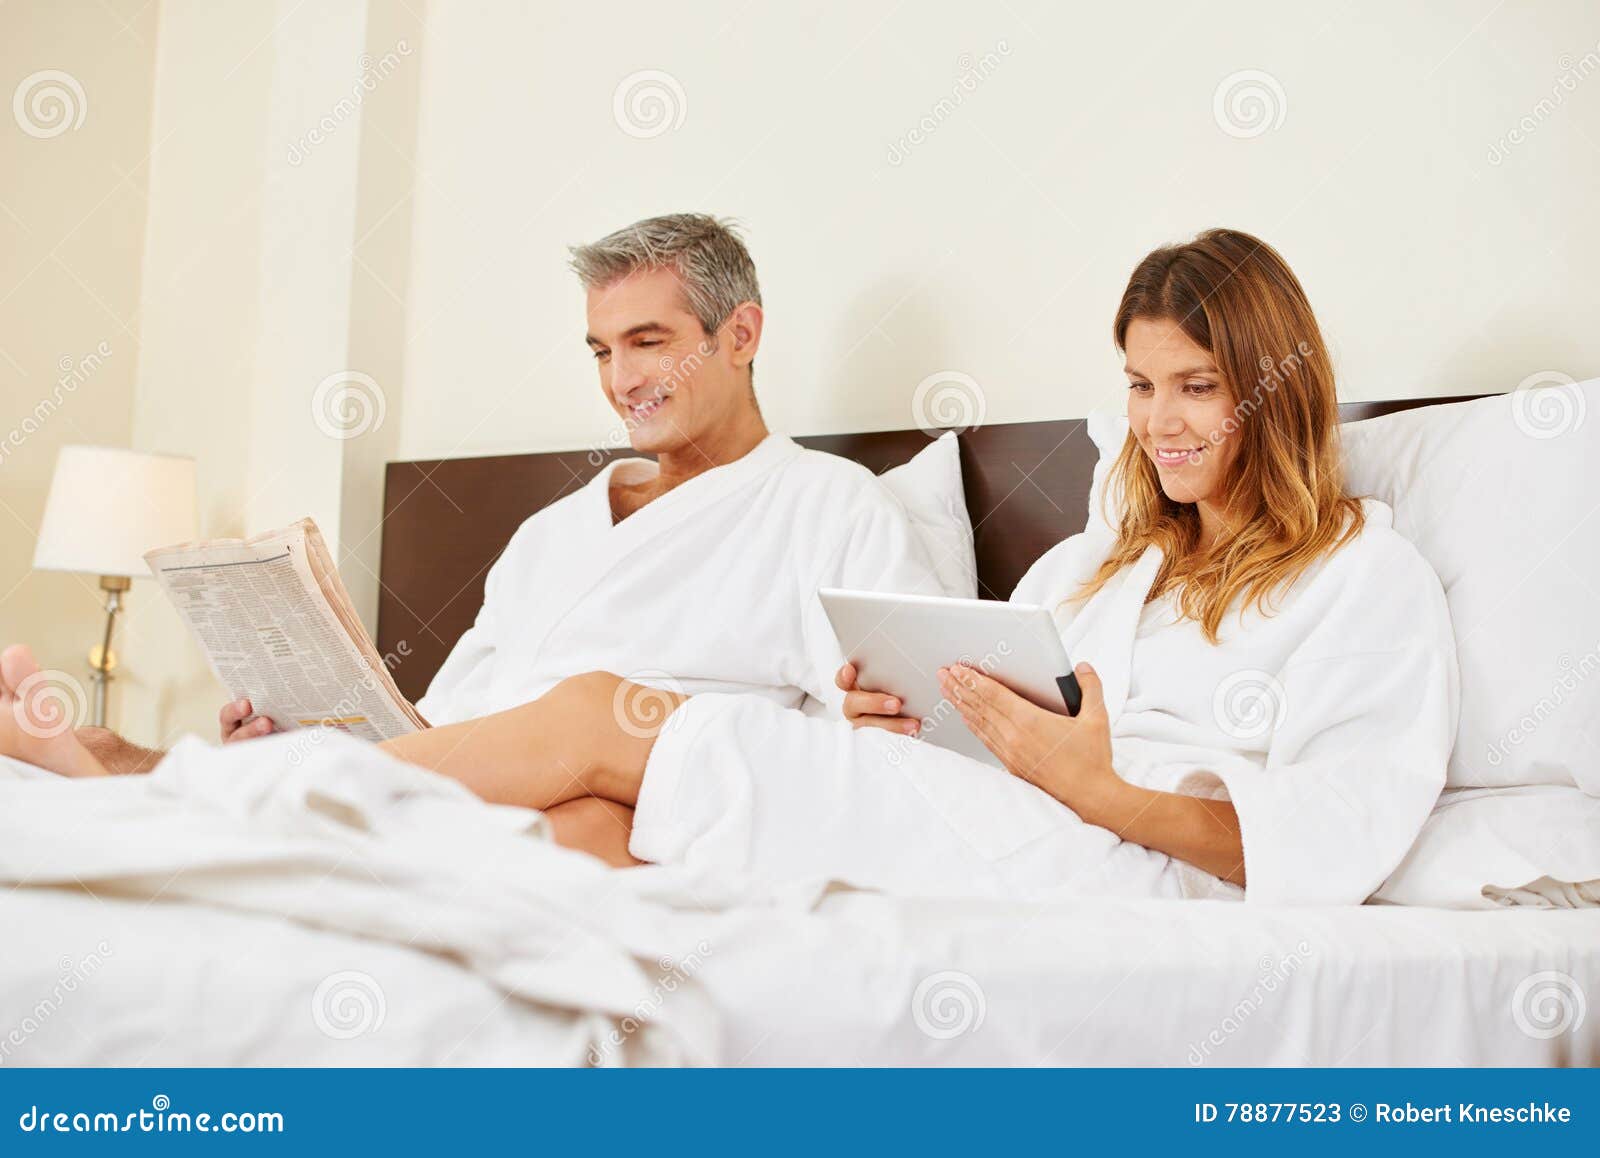 Couple in Hotel Room Reading Newspaper and Tablet Computer Stock Image